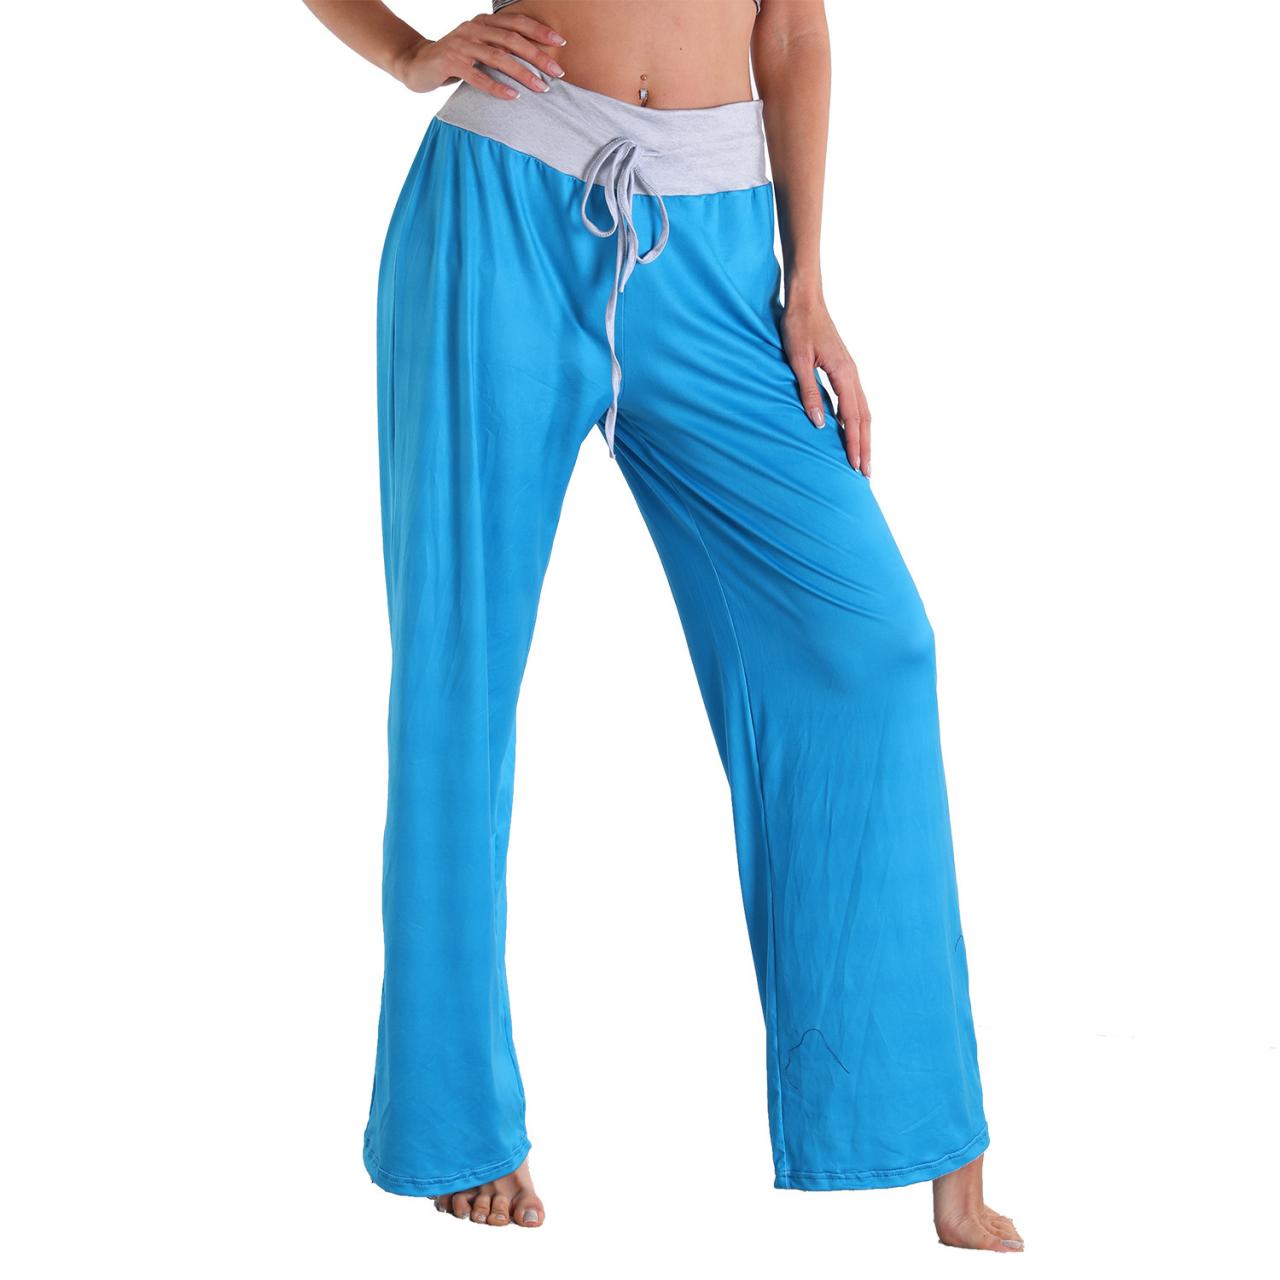 Leisure Sports Yoga Women Casual Elastic Pocket Trousers Loose Fit Strap Sky Blue Solid Color Pants